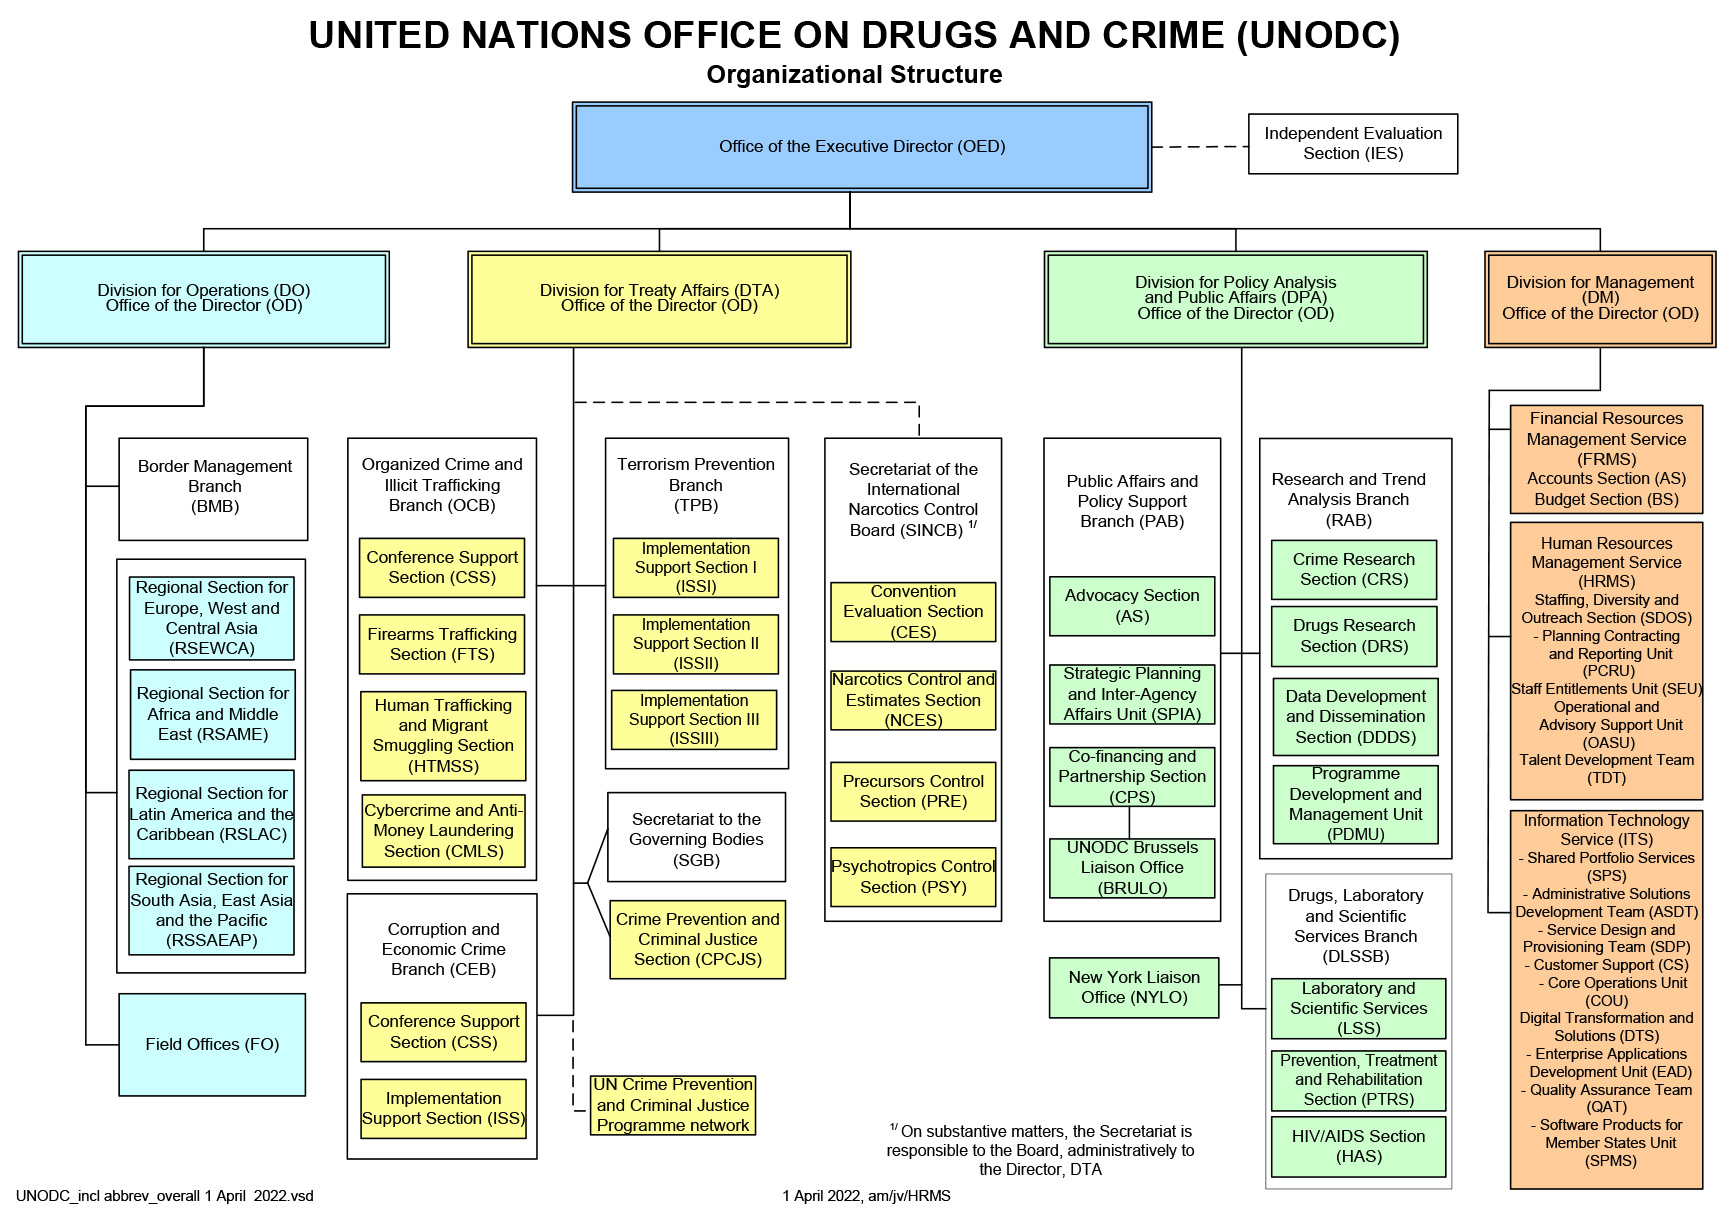 <p><a href="/documents/about-unodc/Visio-UNODC_incl_abbrev_overall_1_April_2022.pdf"><br />Download</a> (pdf)<br /><br /><br /><br /></p>
<h3><span class="mark3d1if30gr">2019</span> <span class="mark38zdo0q2g">UNODC</span> <span class="markoajtmkt27">Results-Based</span> <span class="markzmnwurs7z">Annual</span> <span class="markyj7kwp068">Report</span></h3>
<p><a href="/documents/Advocacy-Section/2019_Results-Based_Annual_Report.pdf">Download e-document</a> (pdf)</p>